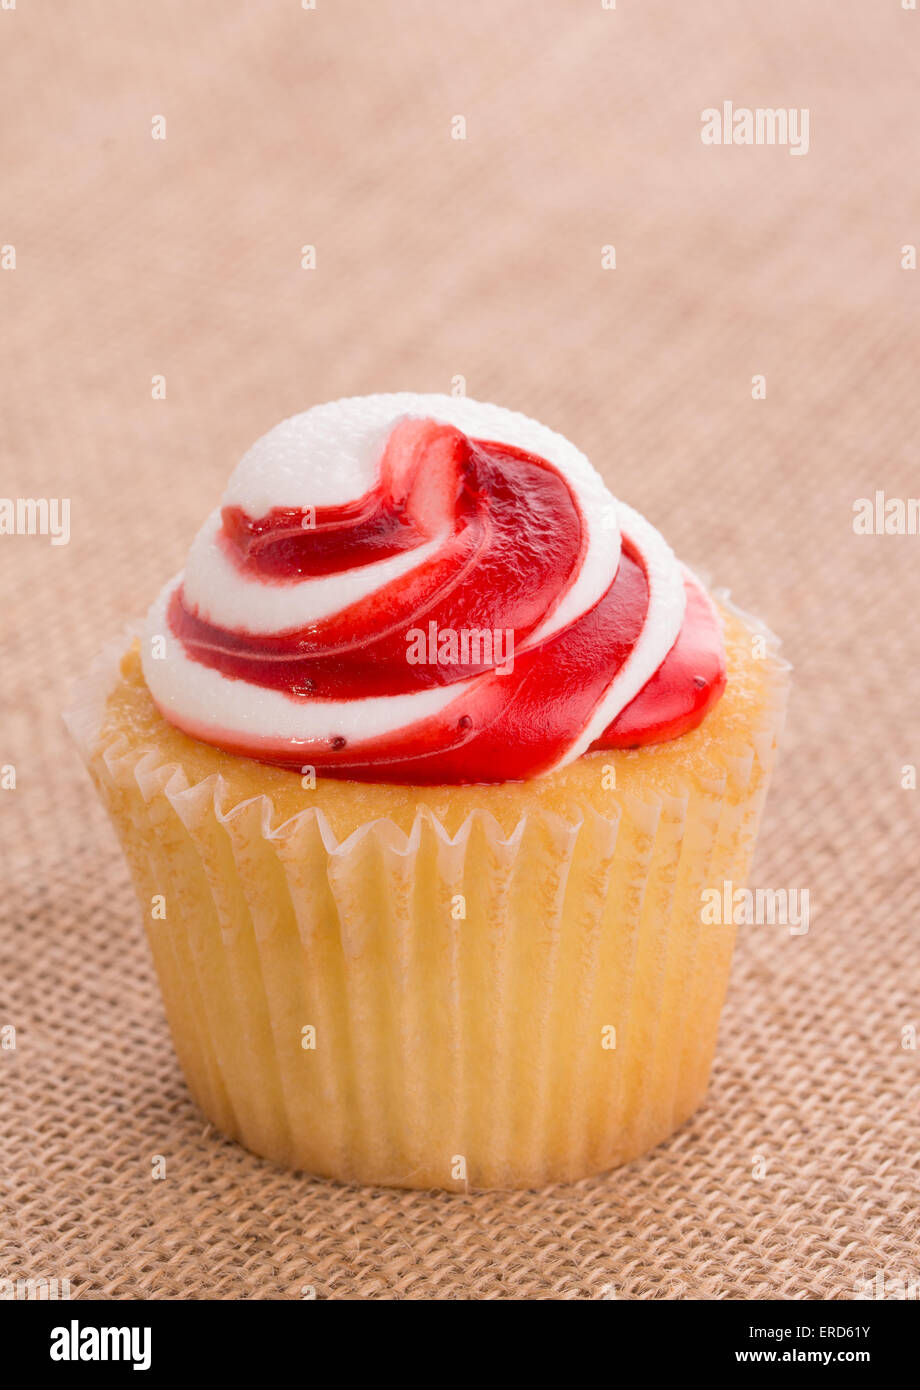 Strawberry flavored swirly top cupcake on simple burlap background Stock Photo